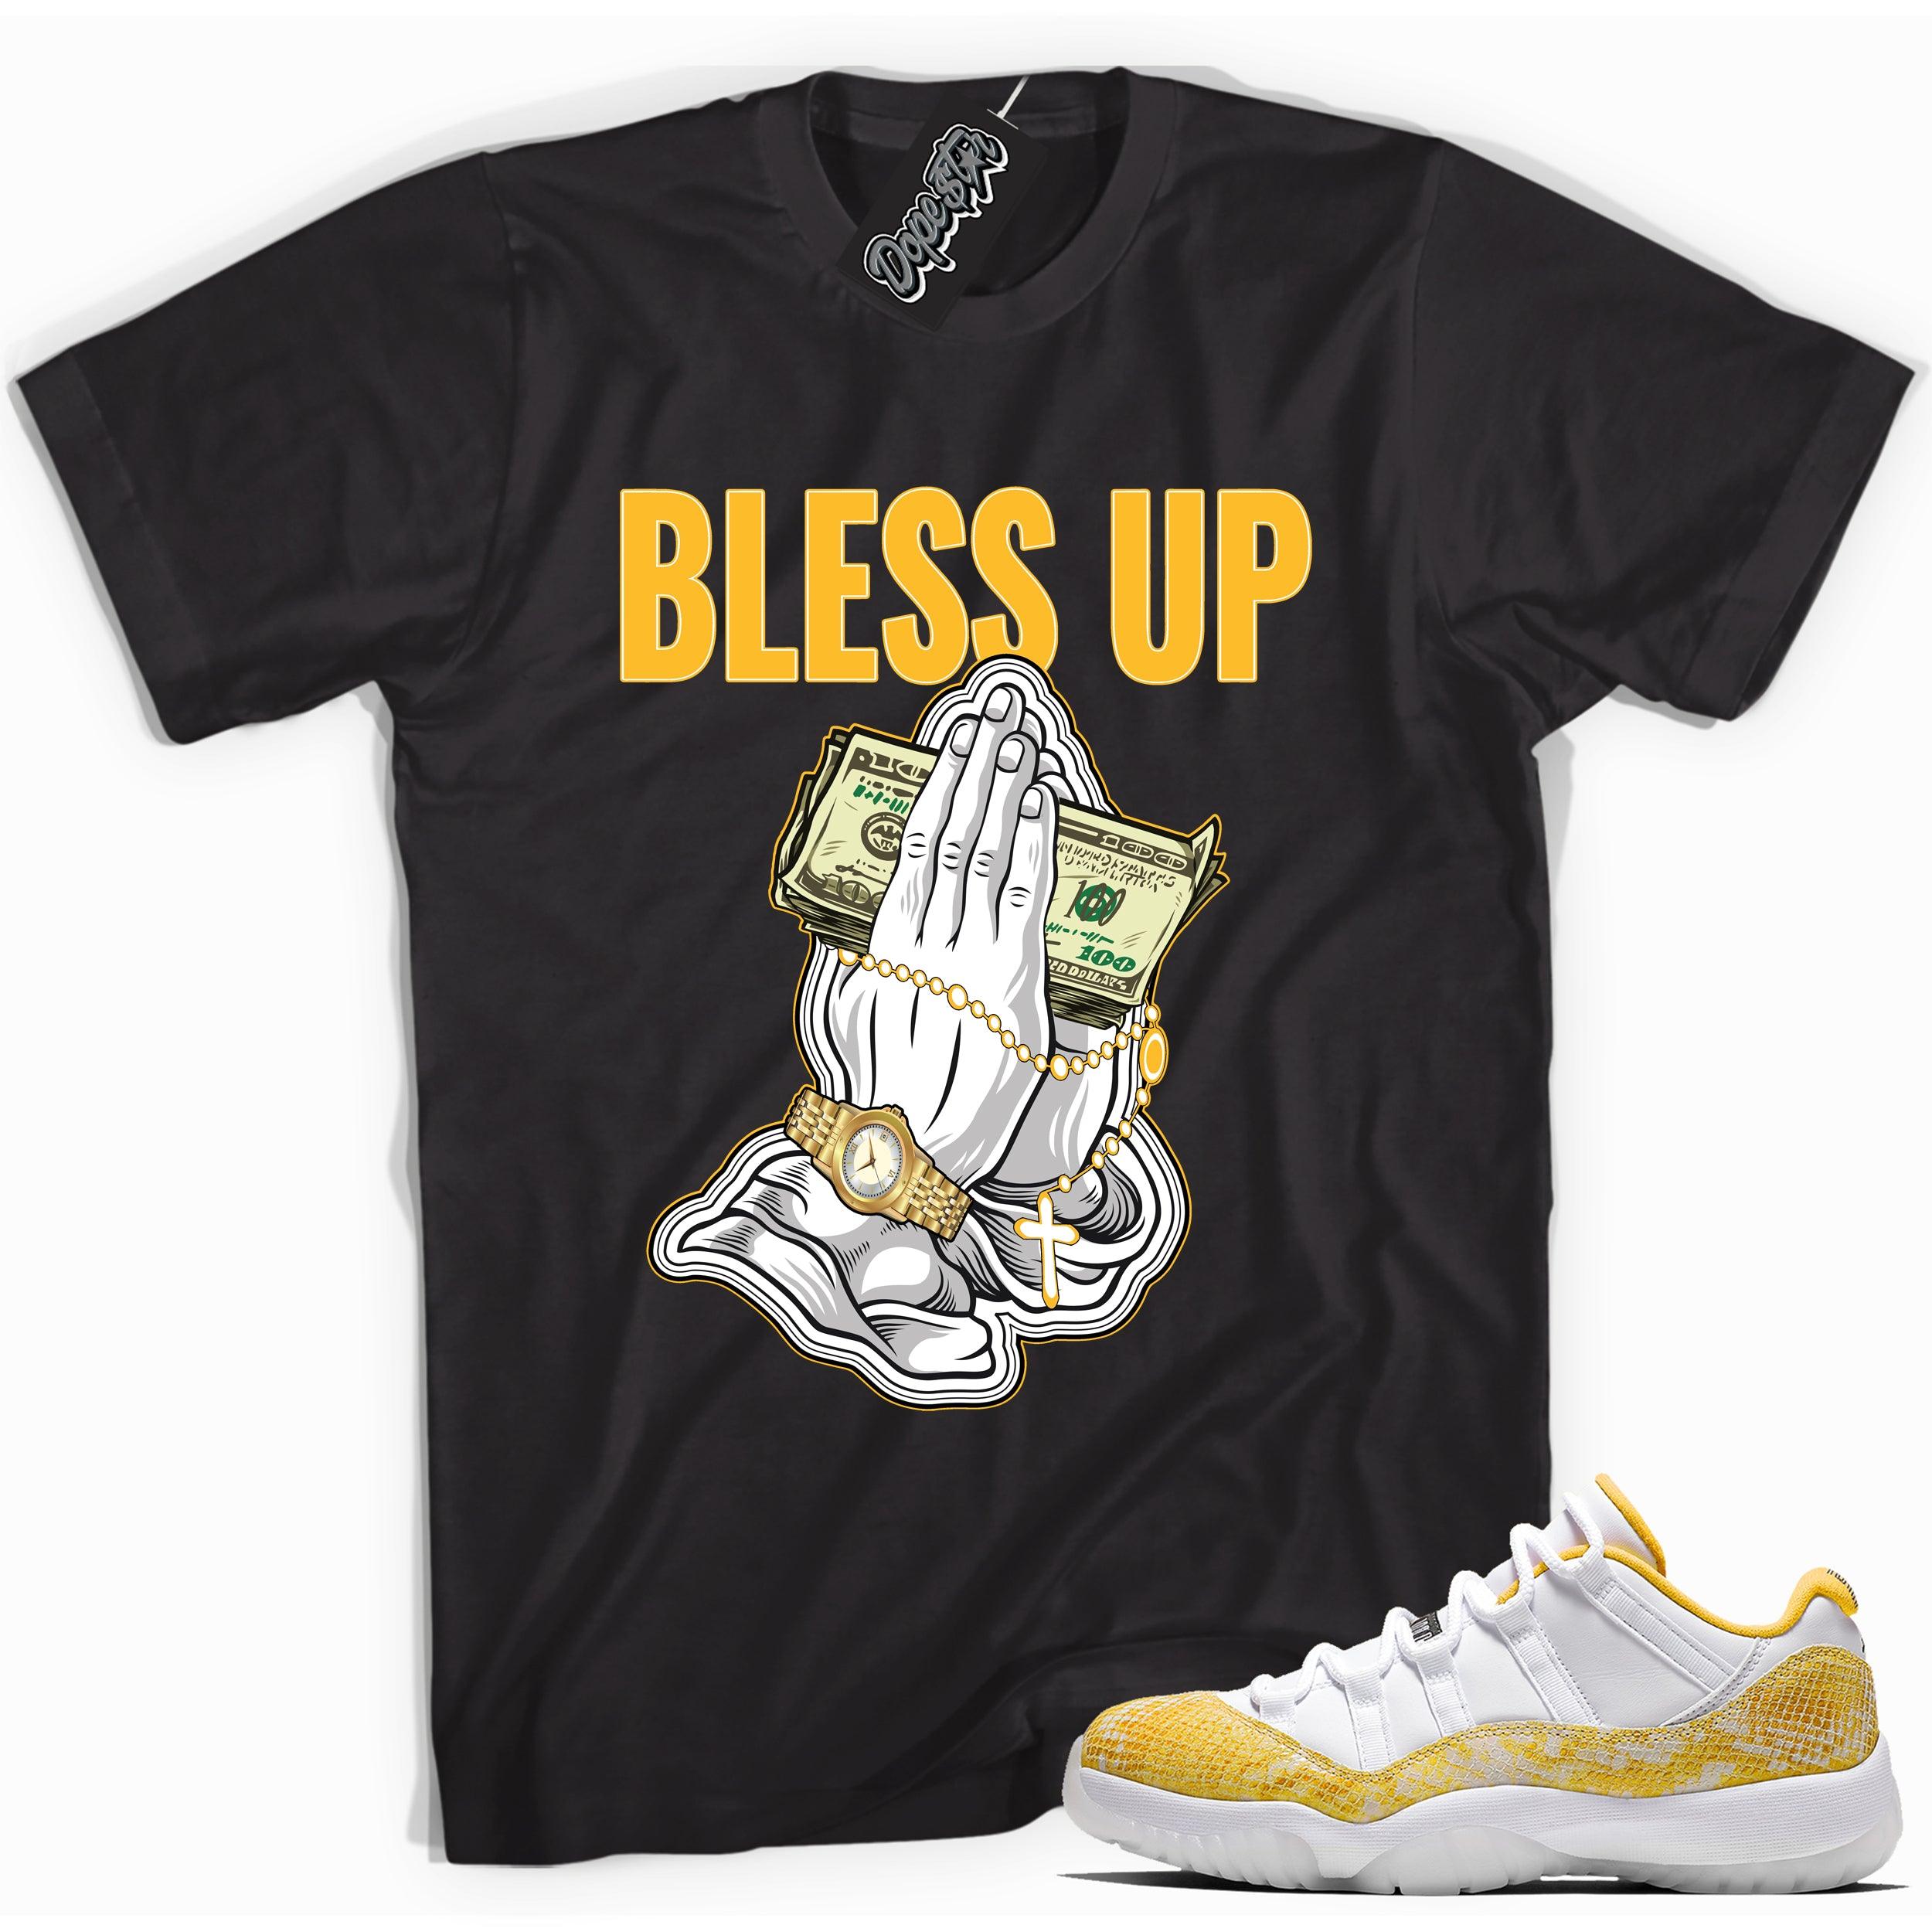 Cool black graphic tee with 'bless up' print, that perfectly matches  Air Jordan 11 Retro Low Yellow Snakeskin sneakers